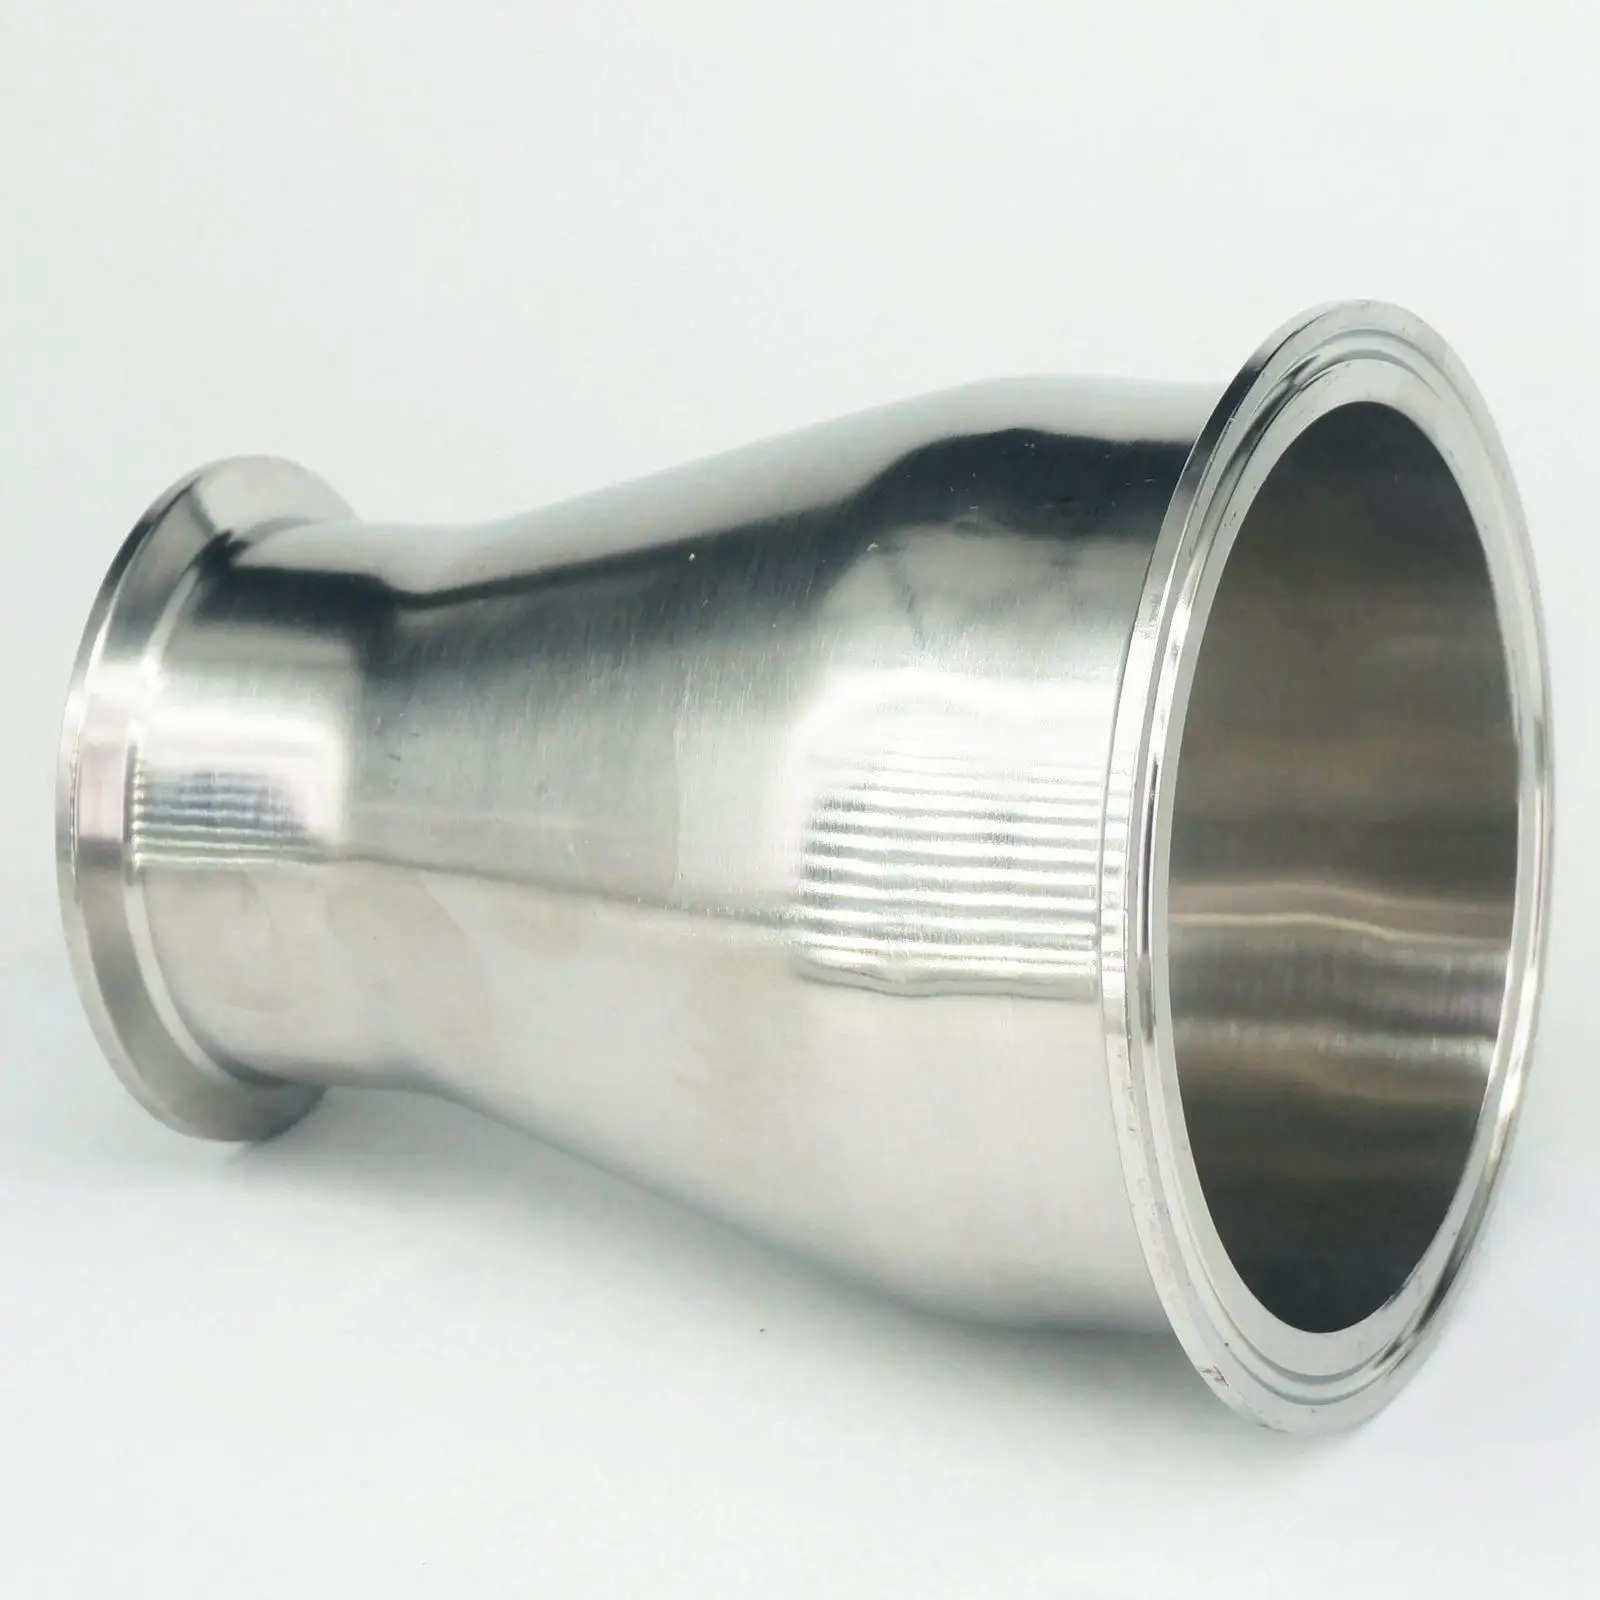 

Fit Tube O.D Reduce 102mm-63mm Tri Clamp 4"-2.5" 304 Stainless Steel Sanitary Ferrule Concentric Pipe Fitting Reducer